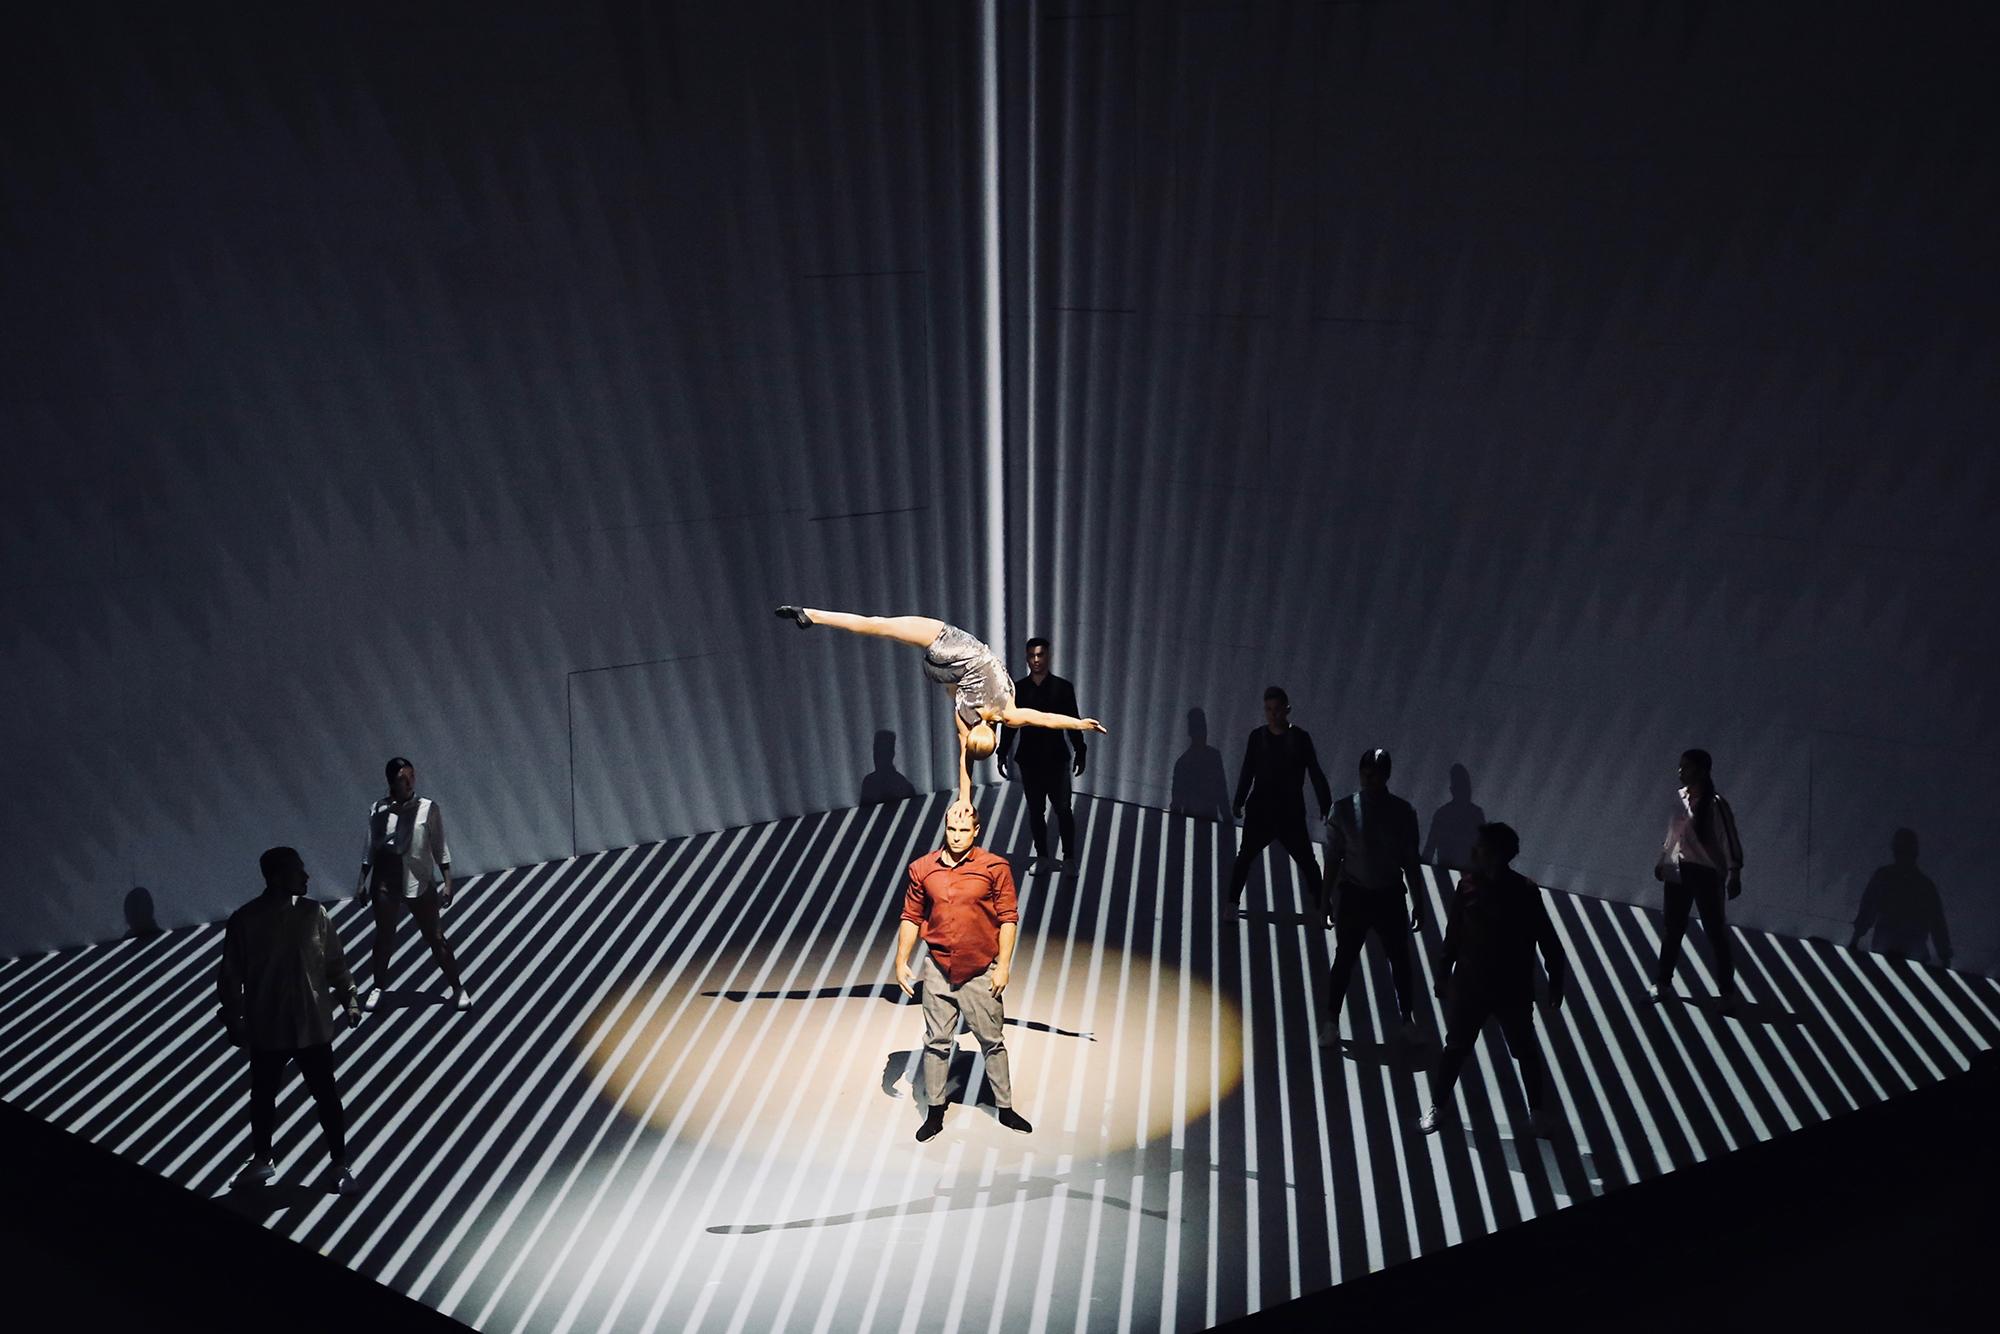 An acrobat does a one handed handstand on a man's head while other dancers look on. They all are on a cube shaped stage with stripes projected on the floor.